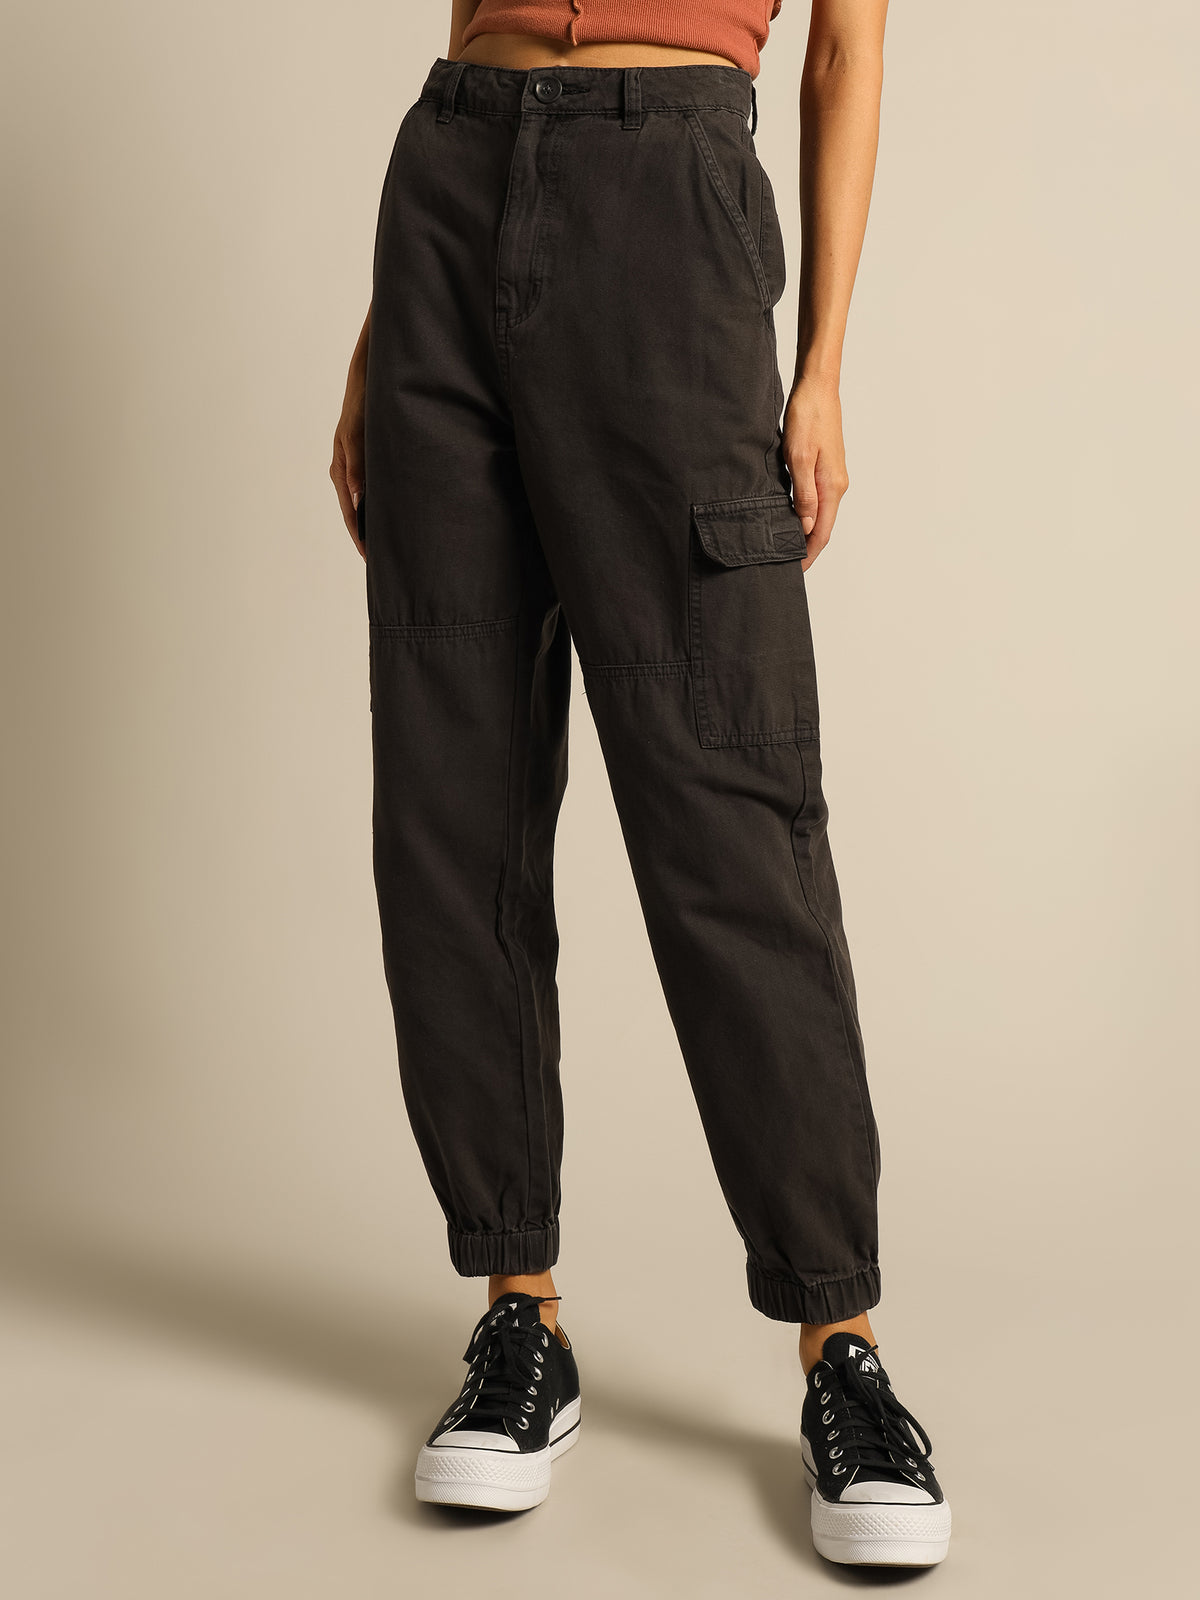 Sian Cargo Pants in Washed Black